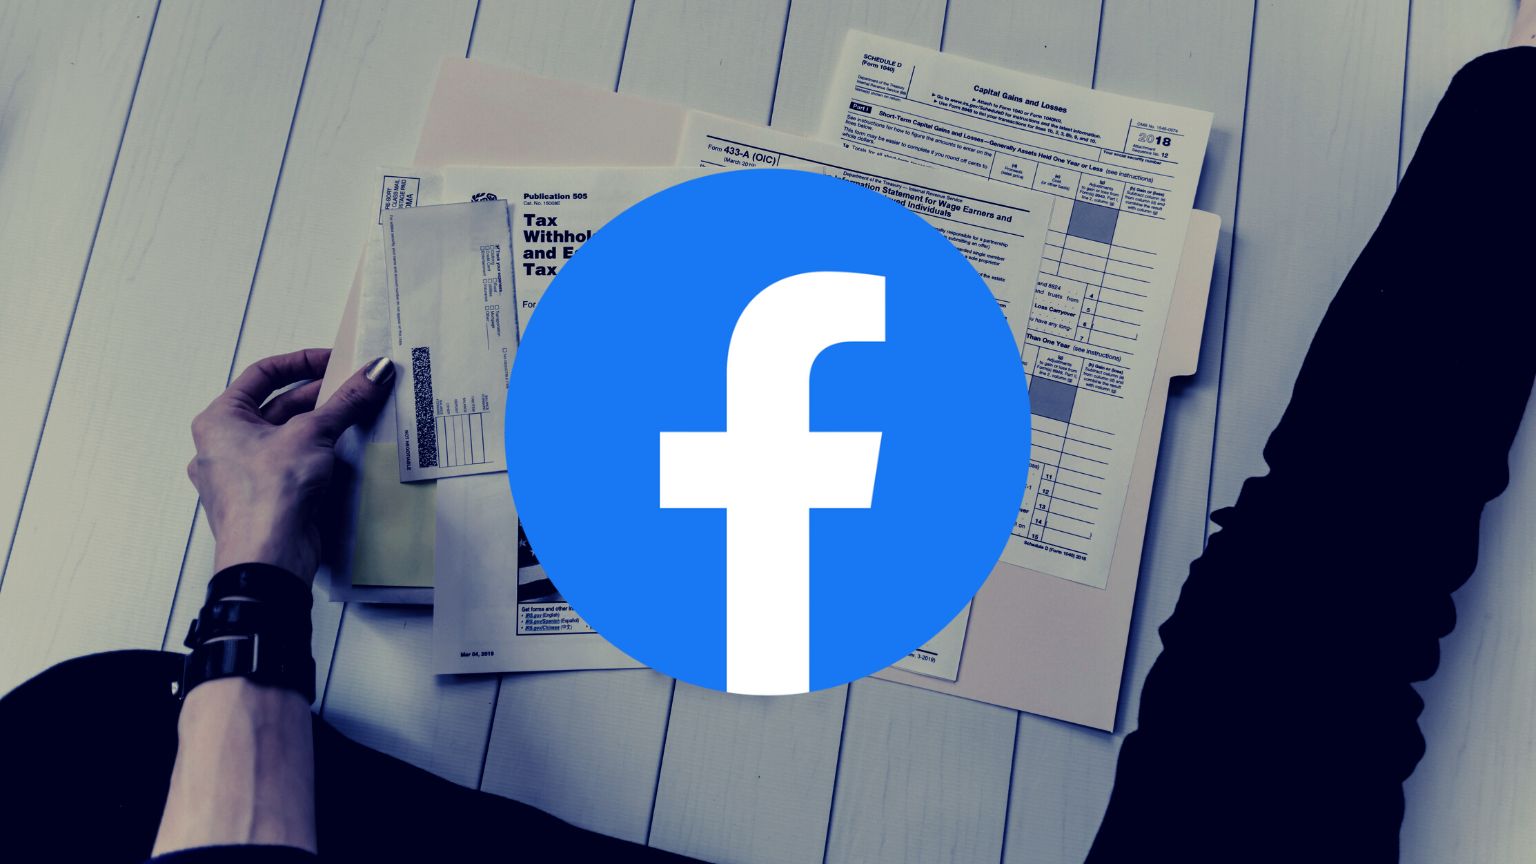 Tax filing services caught sending data to Facebook